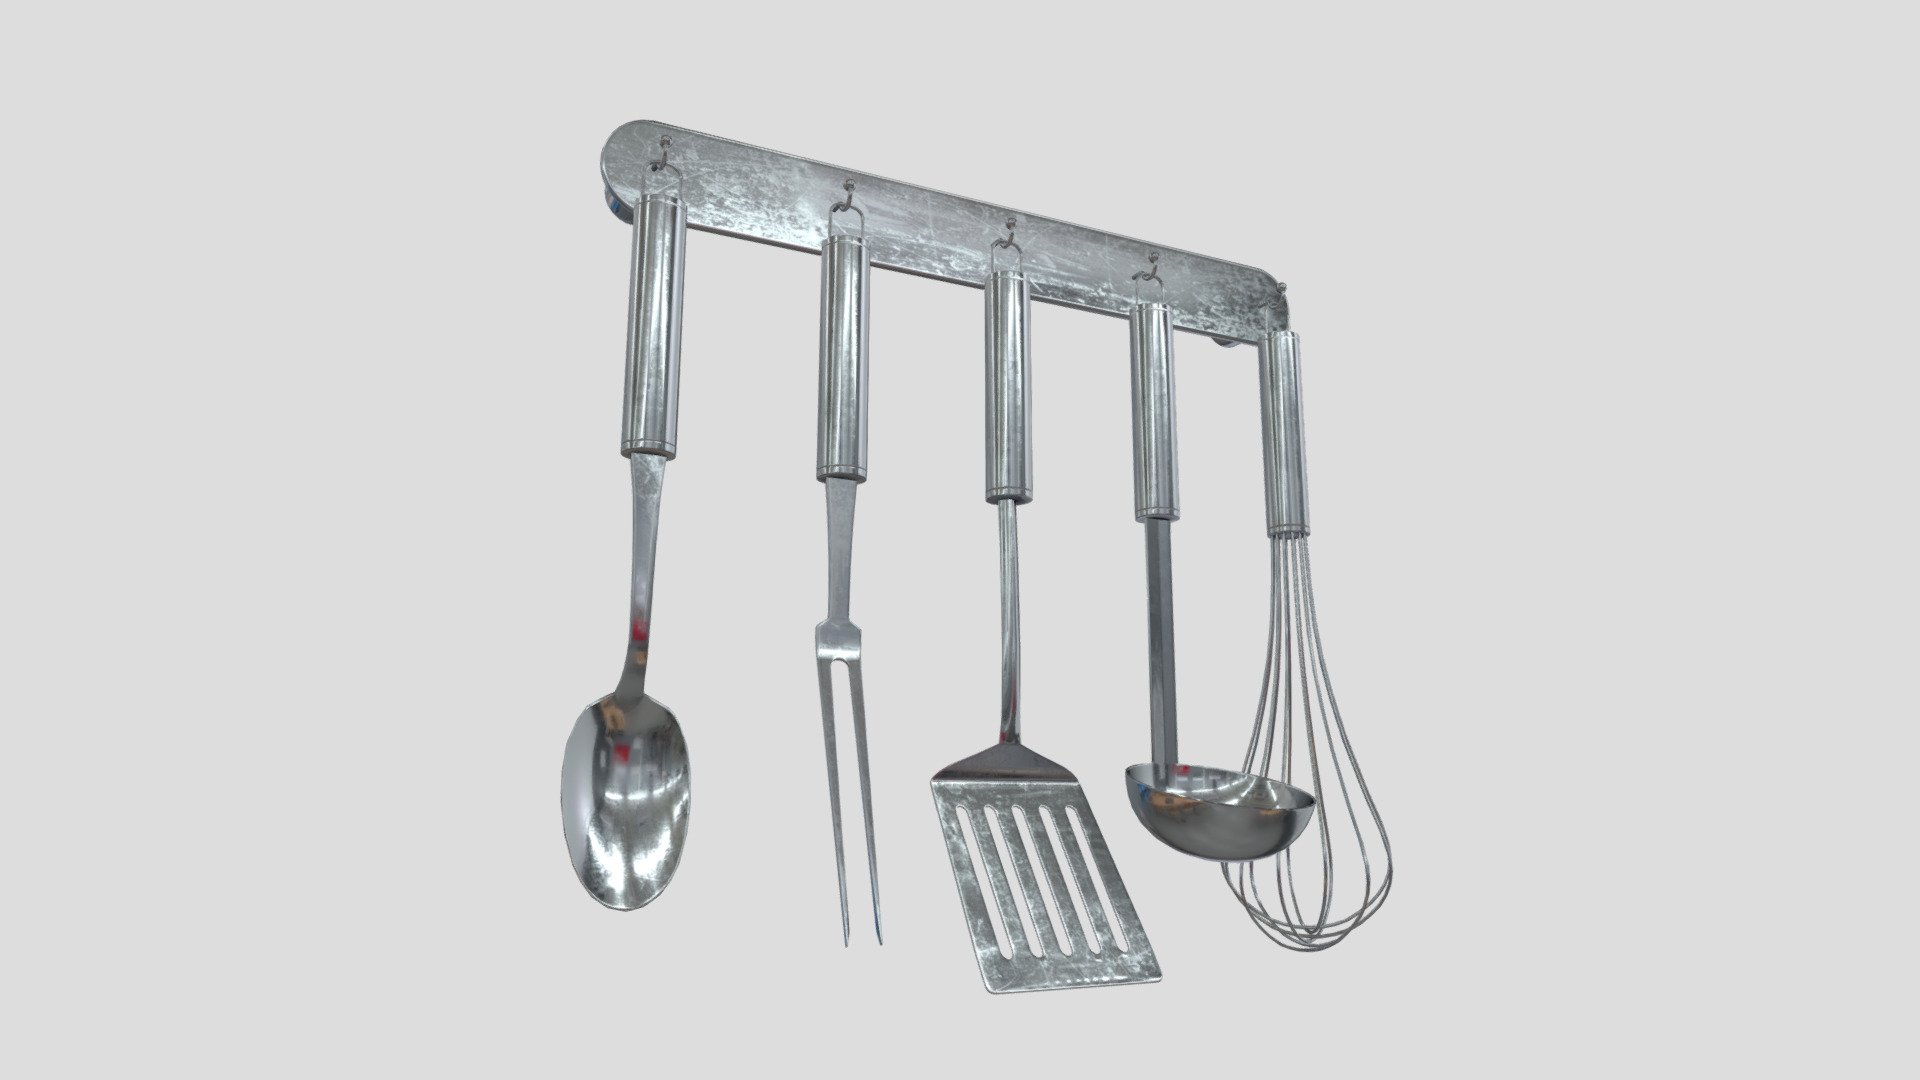 &lsquo;Looks like you got all tools together right now - Let's make a cooking celebration!’

● 2048 x 2048 PBR textures

● normal map is baked from the high poly model.

If you need help with this model or have a question – please do not hesitate to contact with me. I will be happy to help you.

Contact: plaggy.net@gmail.com - Kitchen Utensil Rack - Buy Royalty Free 3D model by plaggy 3d model